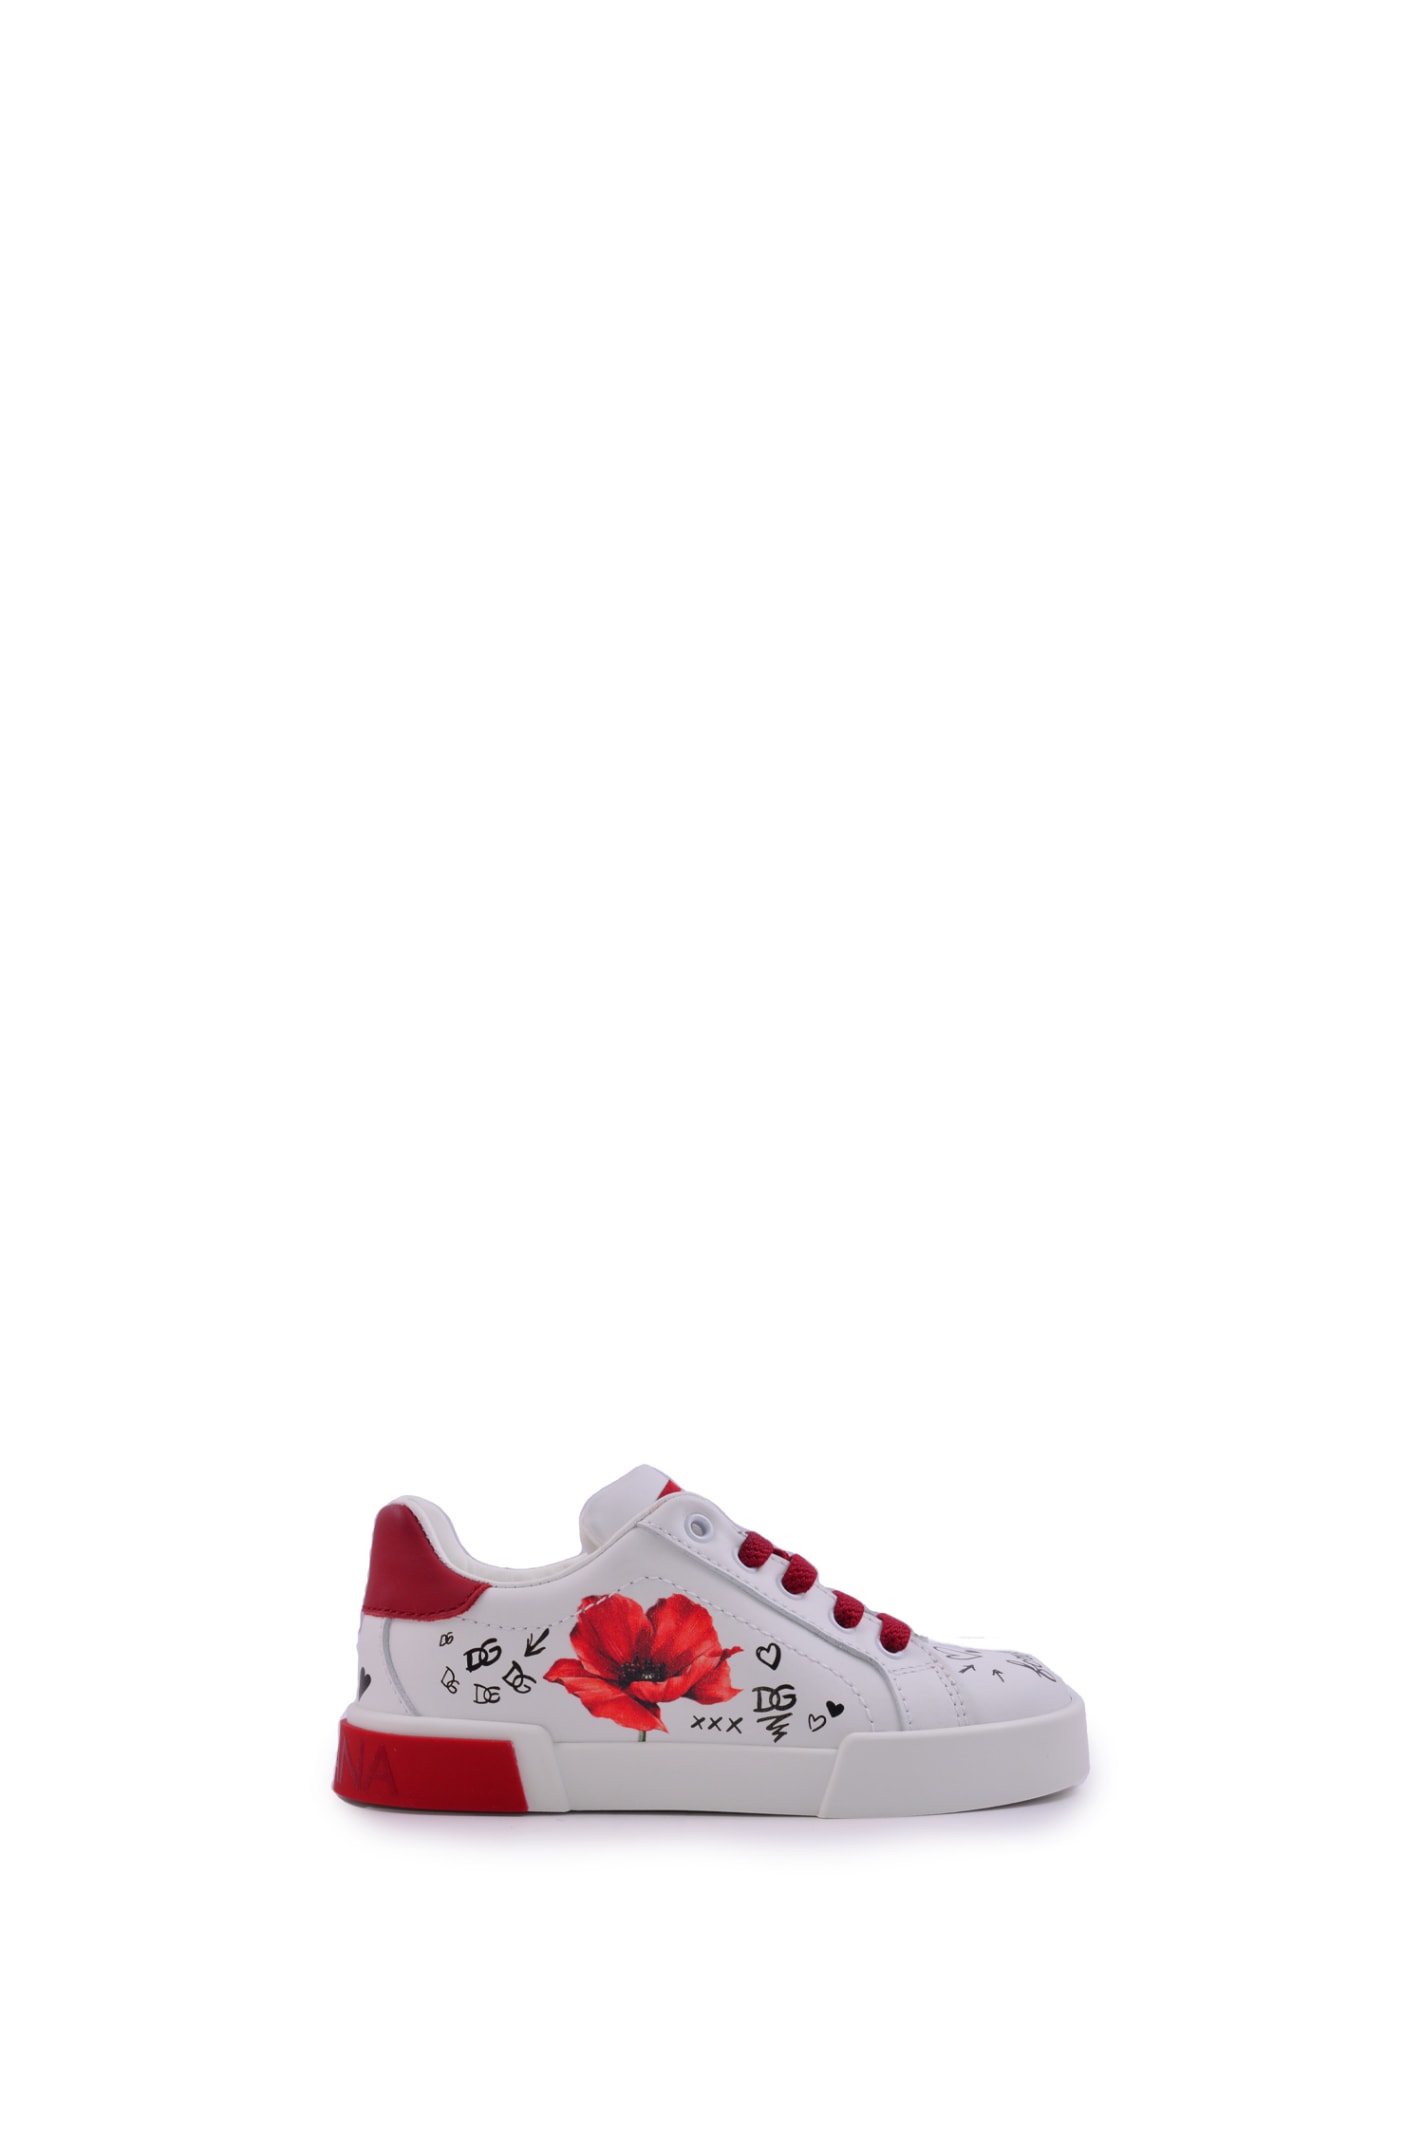 Dolce & Gabbana Sneakers With Poppy Print